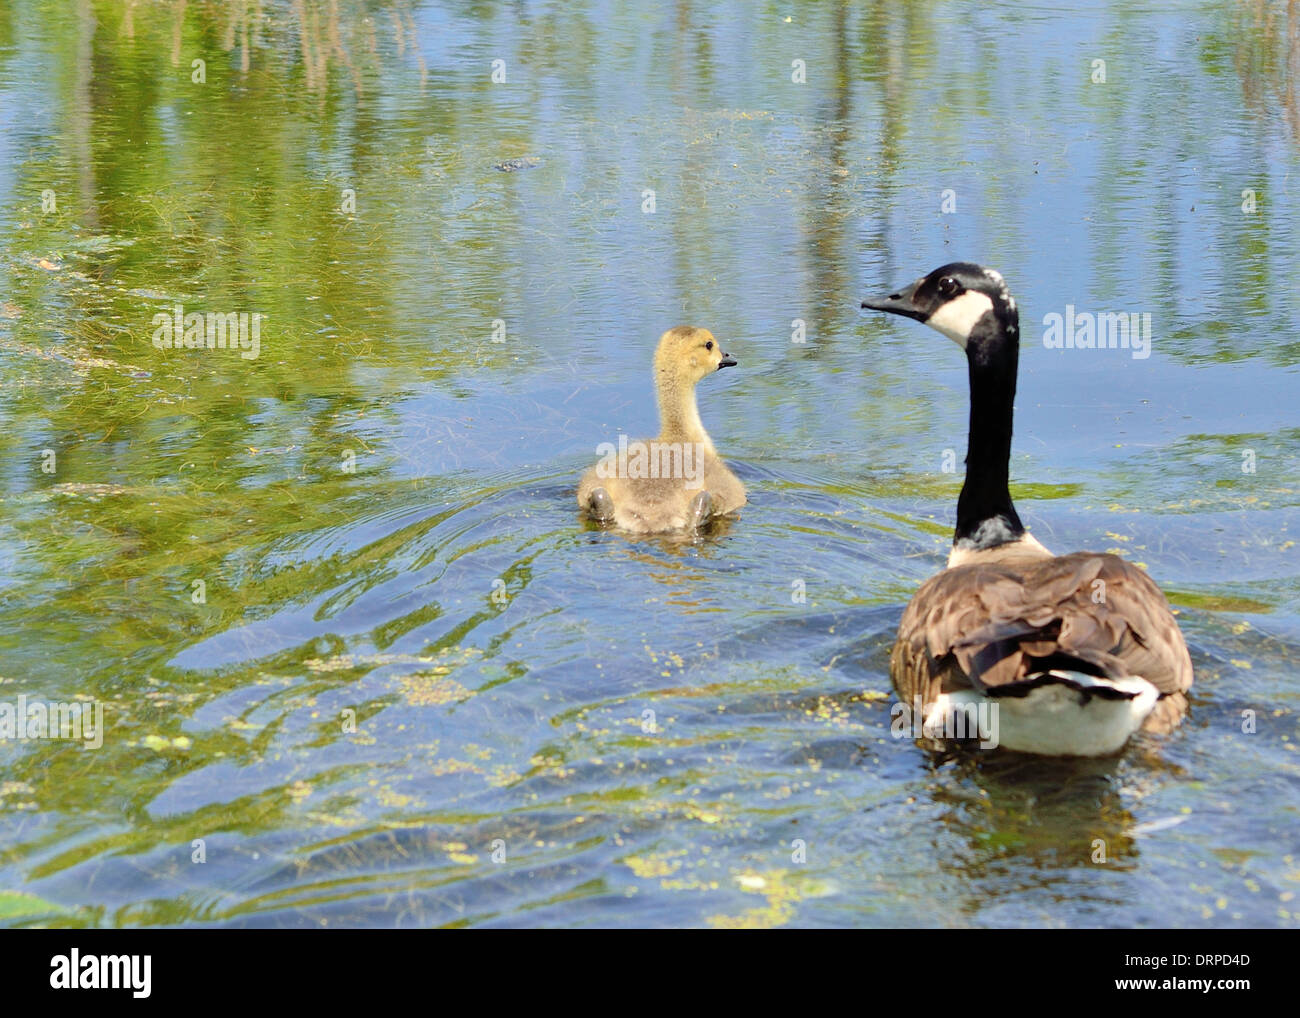 A Canada goose gosling floating in a body of water. Stock Photo